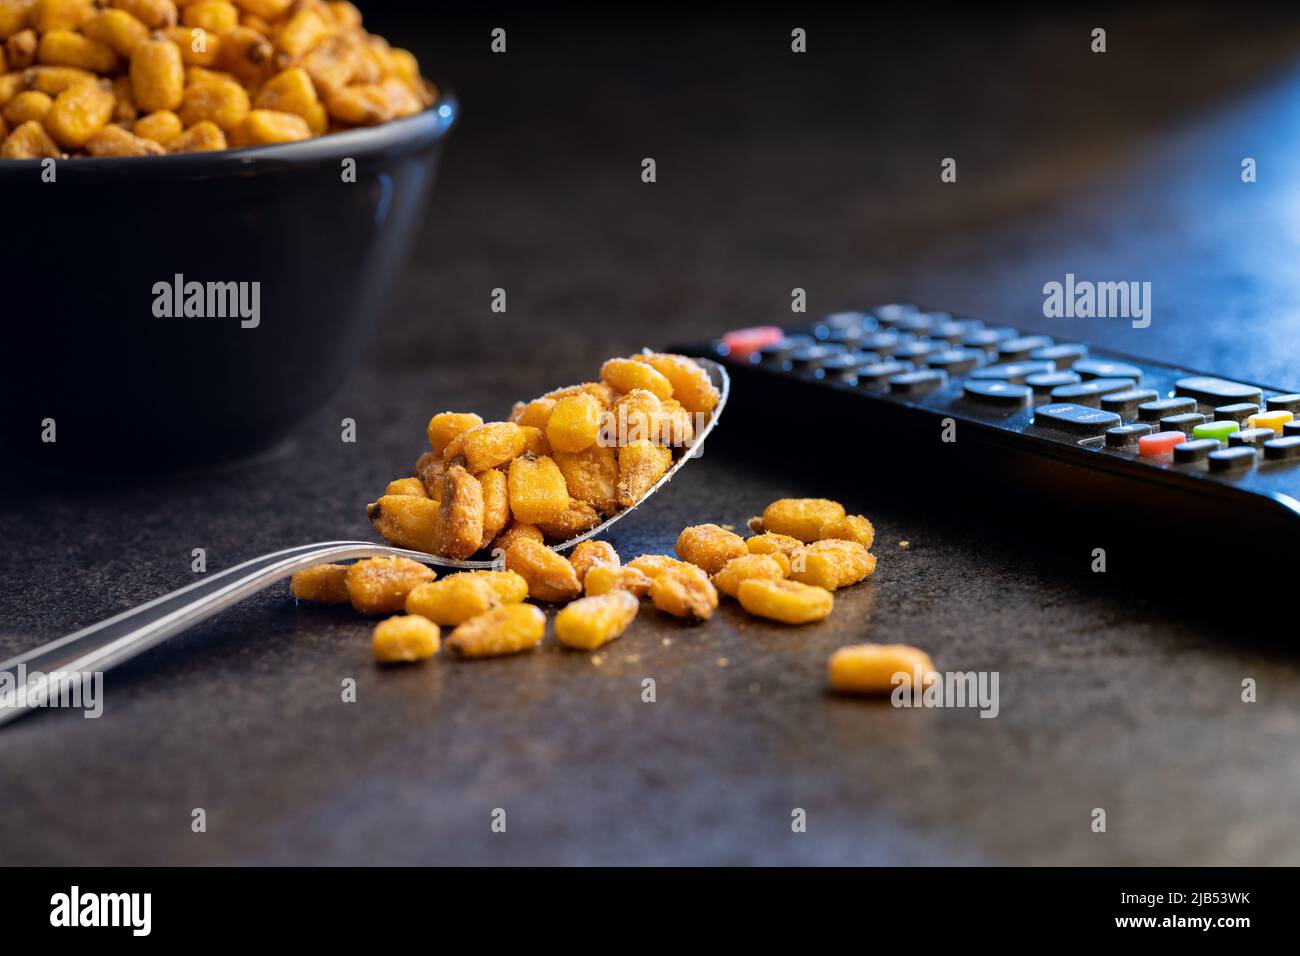 Roasted salted corn snack in spoon on a black table. Stock Photo